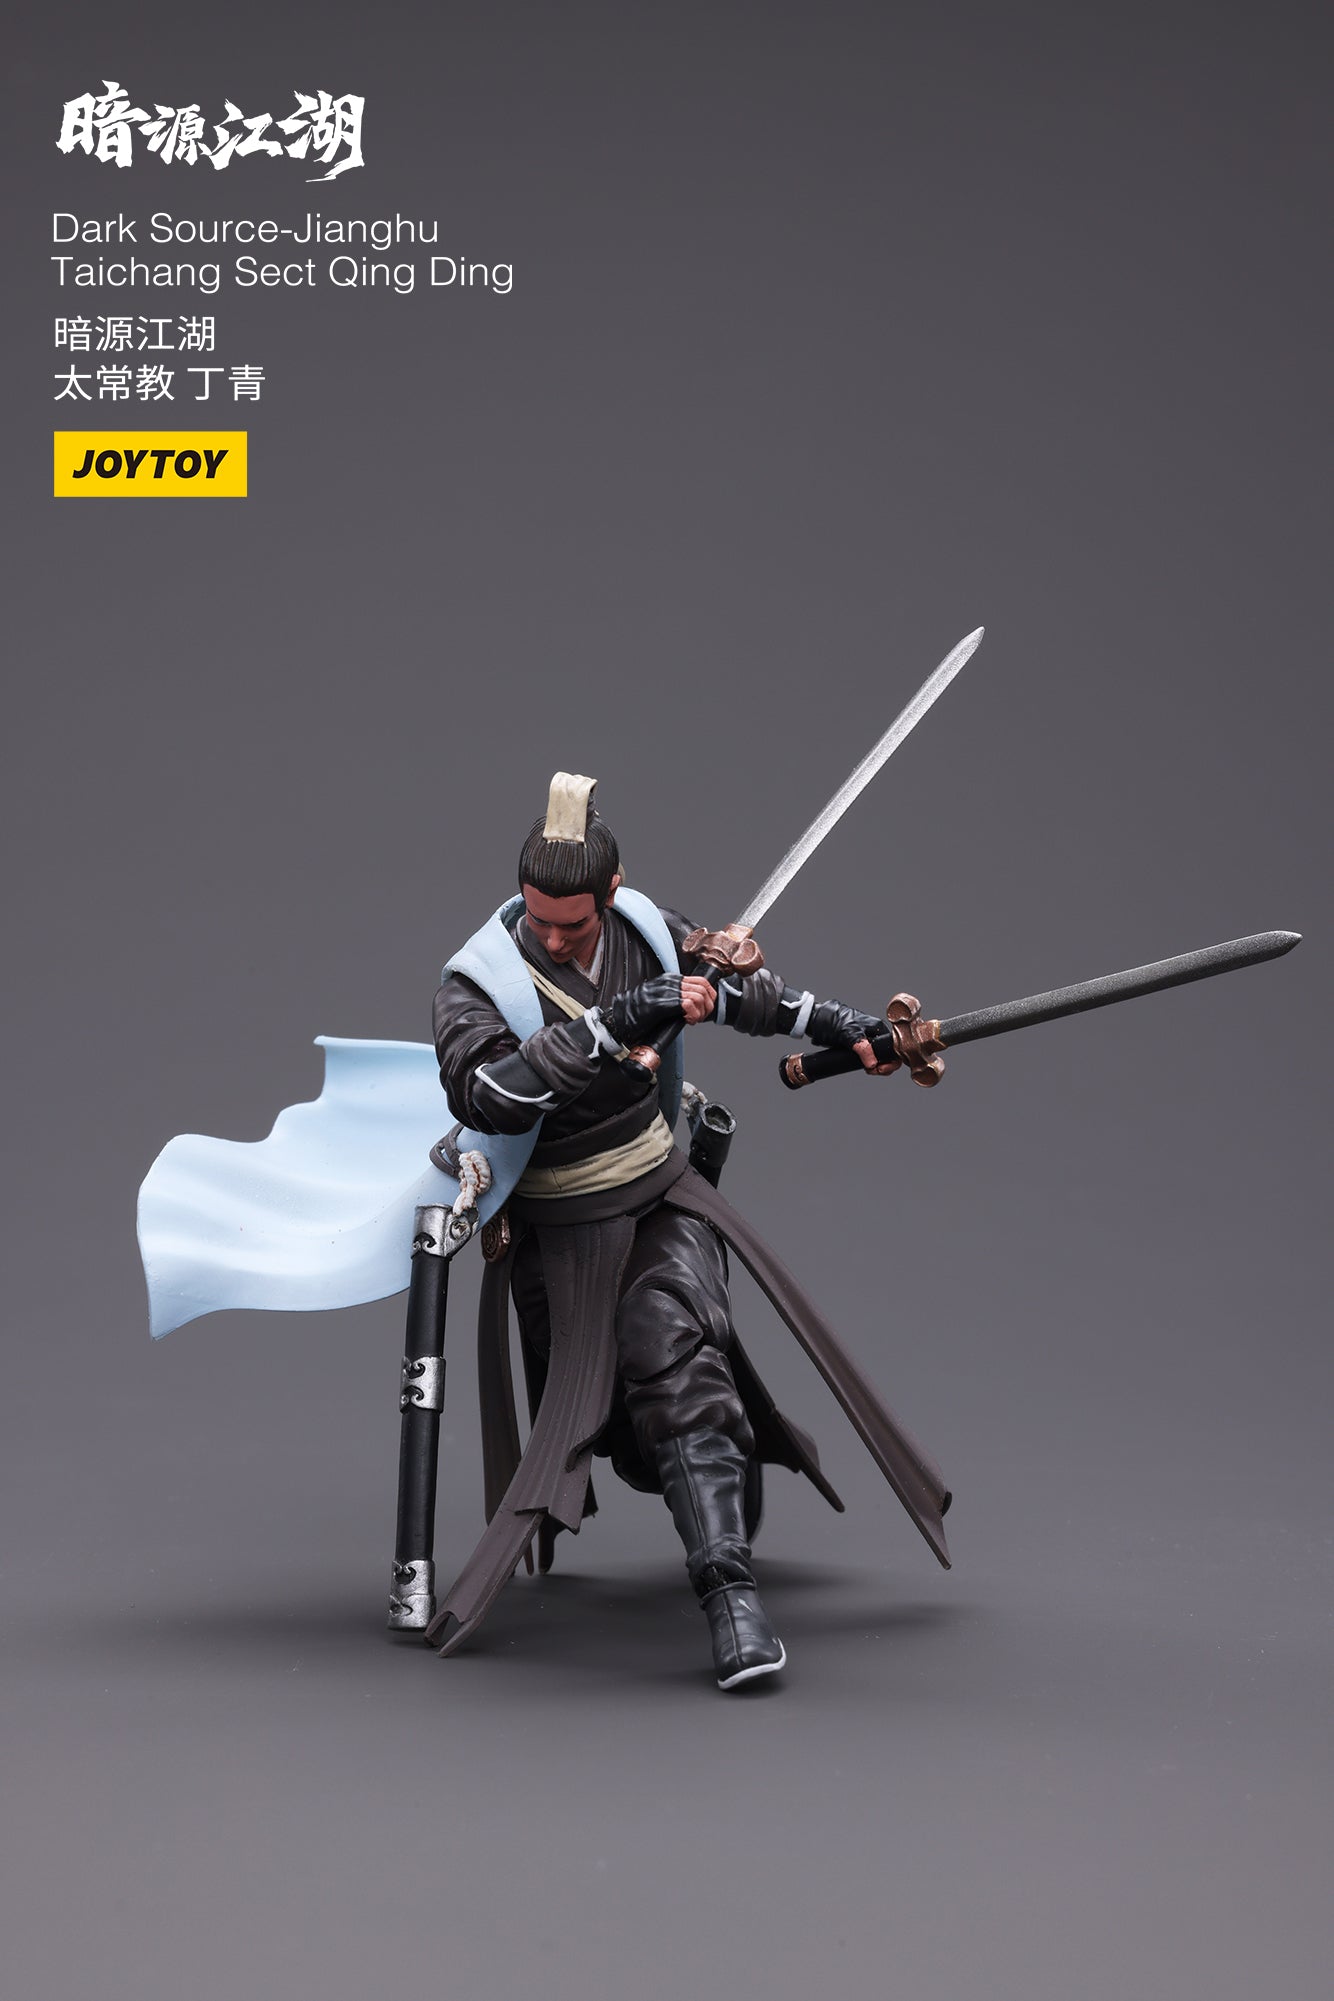 Joy Toy Dark Source JiangHu Taichang Sect Qing Ding figure is incredibly detailed in 1/18 scale. JoyToy, each figure is highly articulated and includes accessories. 